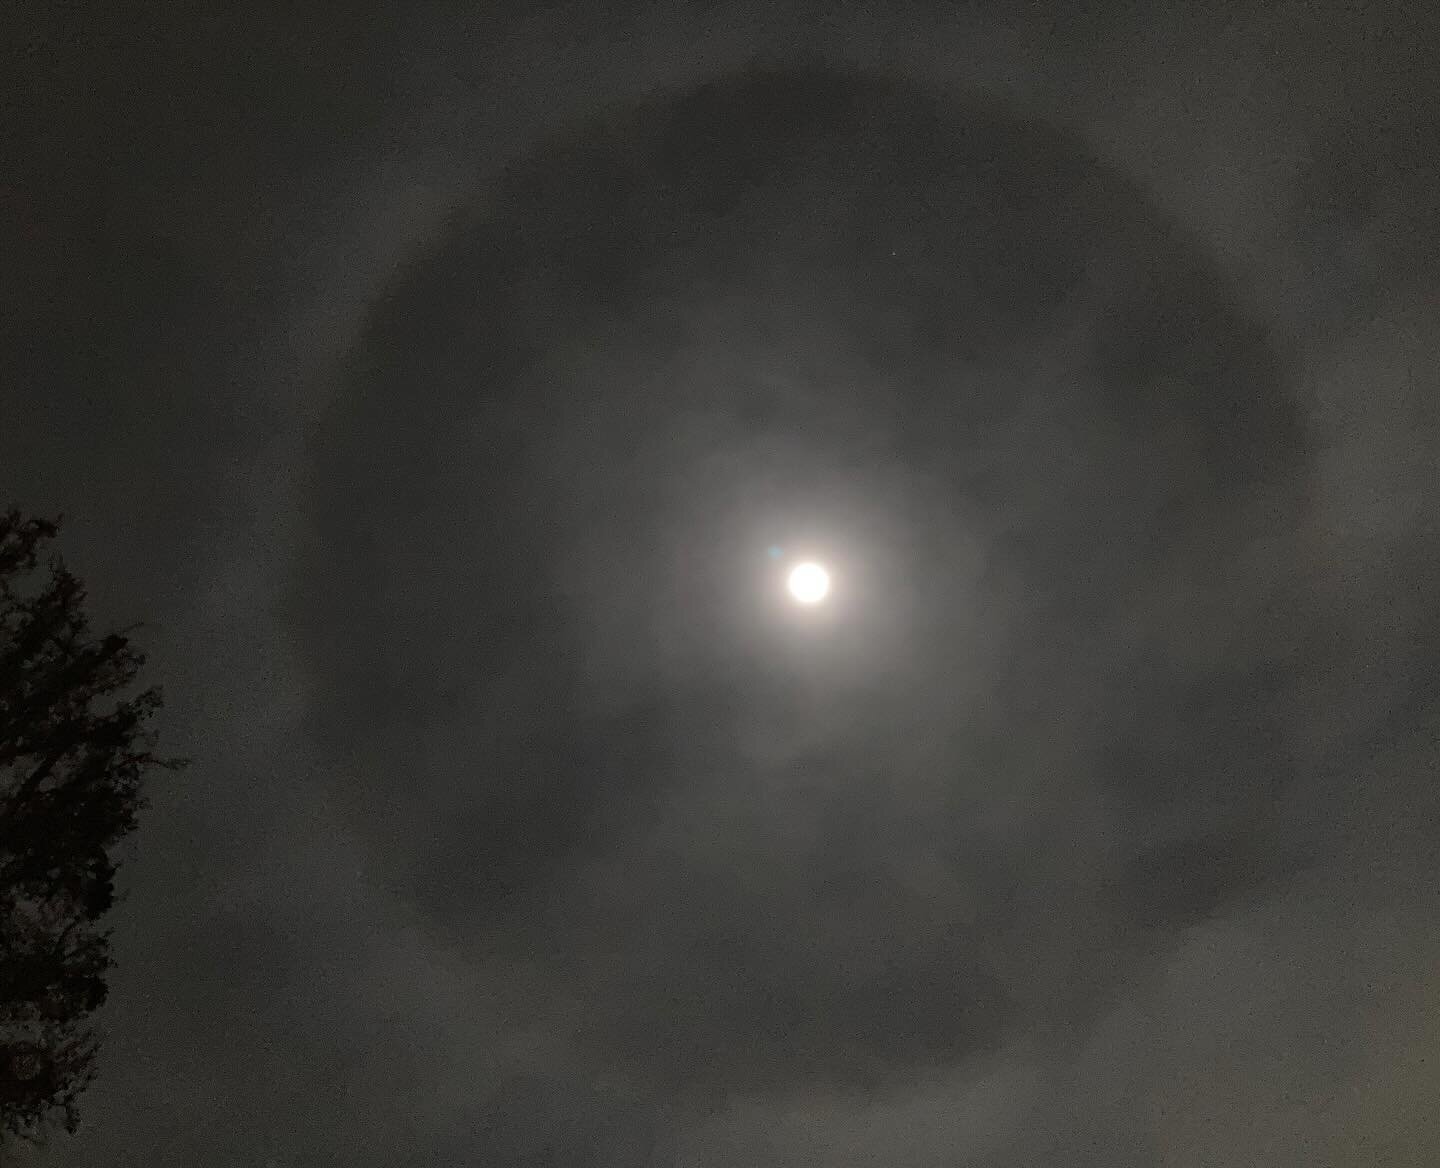 In awe of this huge ring around the moon tonight. Tree for scale. #moonmagic #nightsky #fullmoon #snowmoon #nofilter